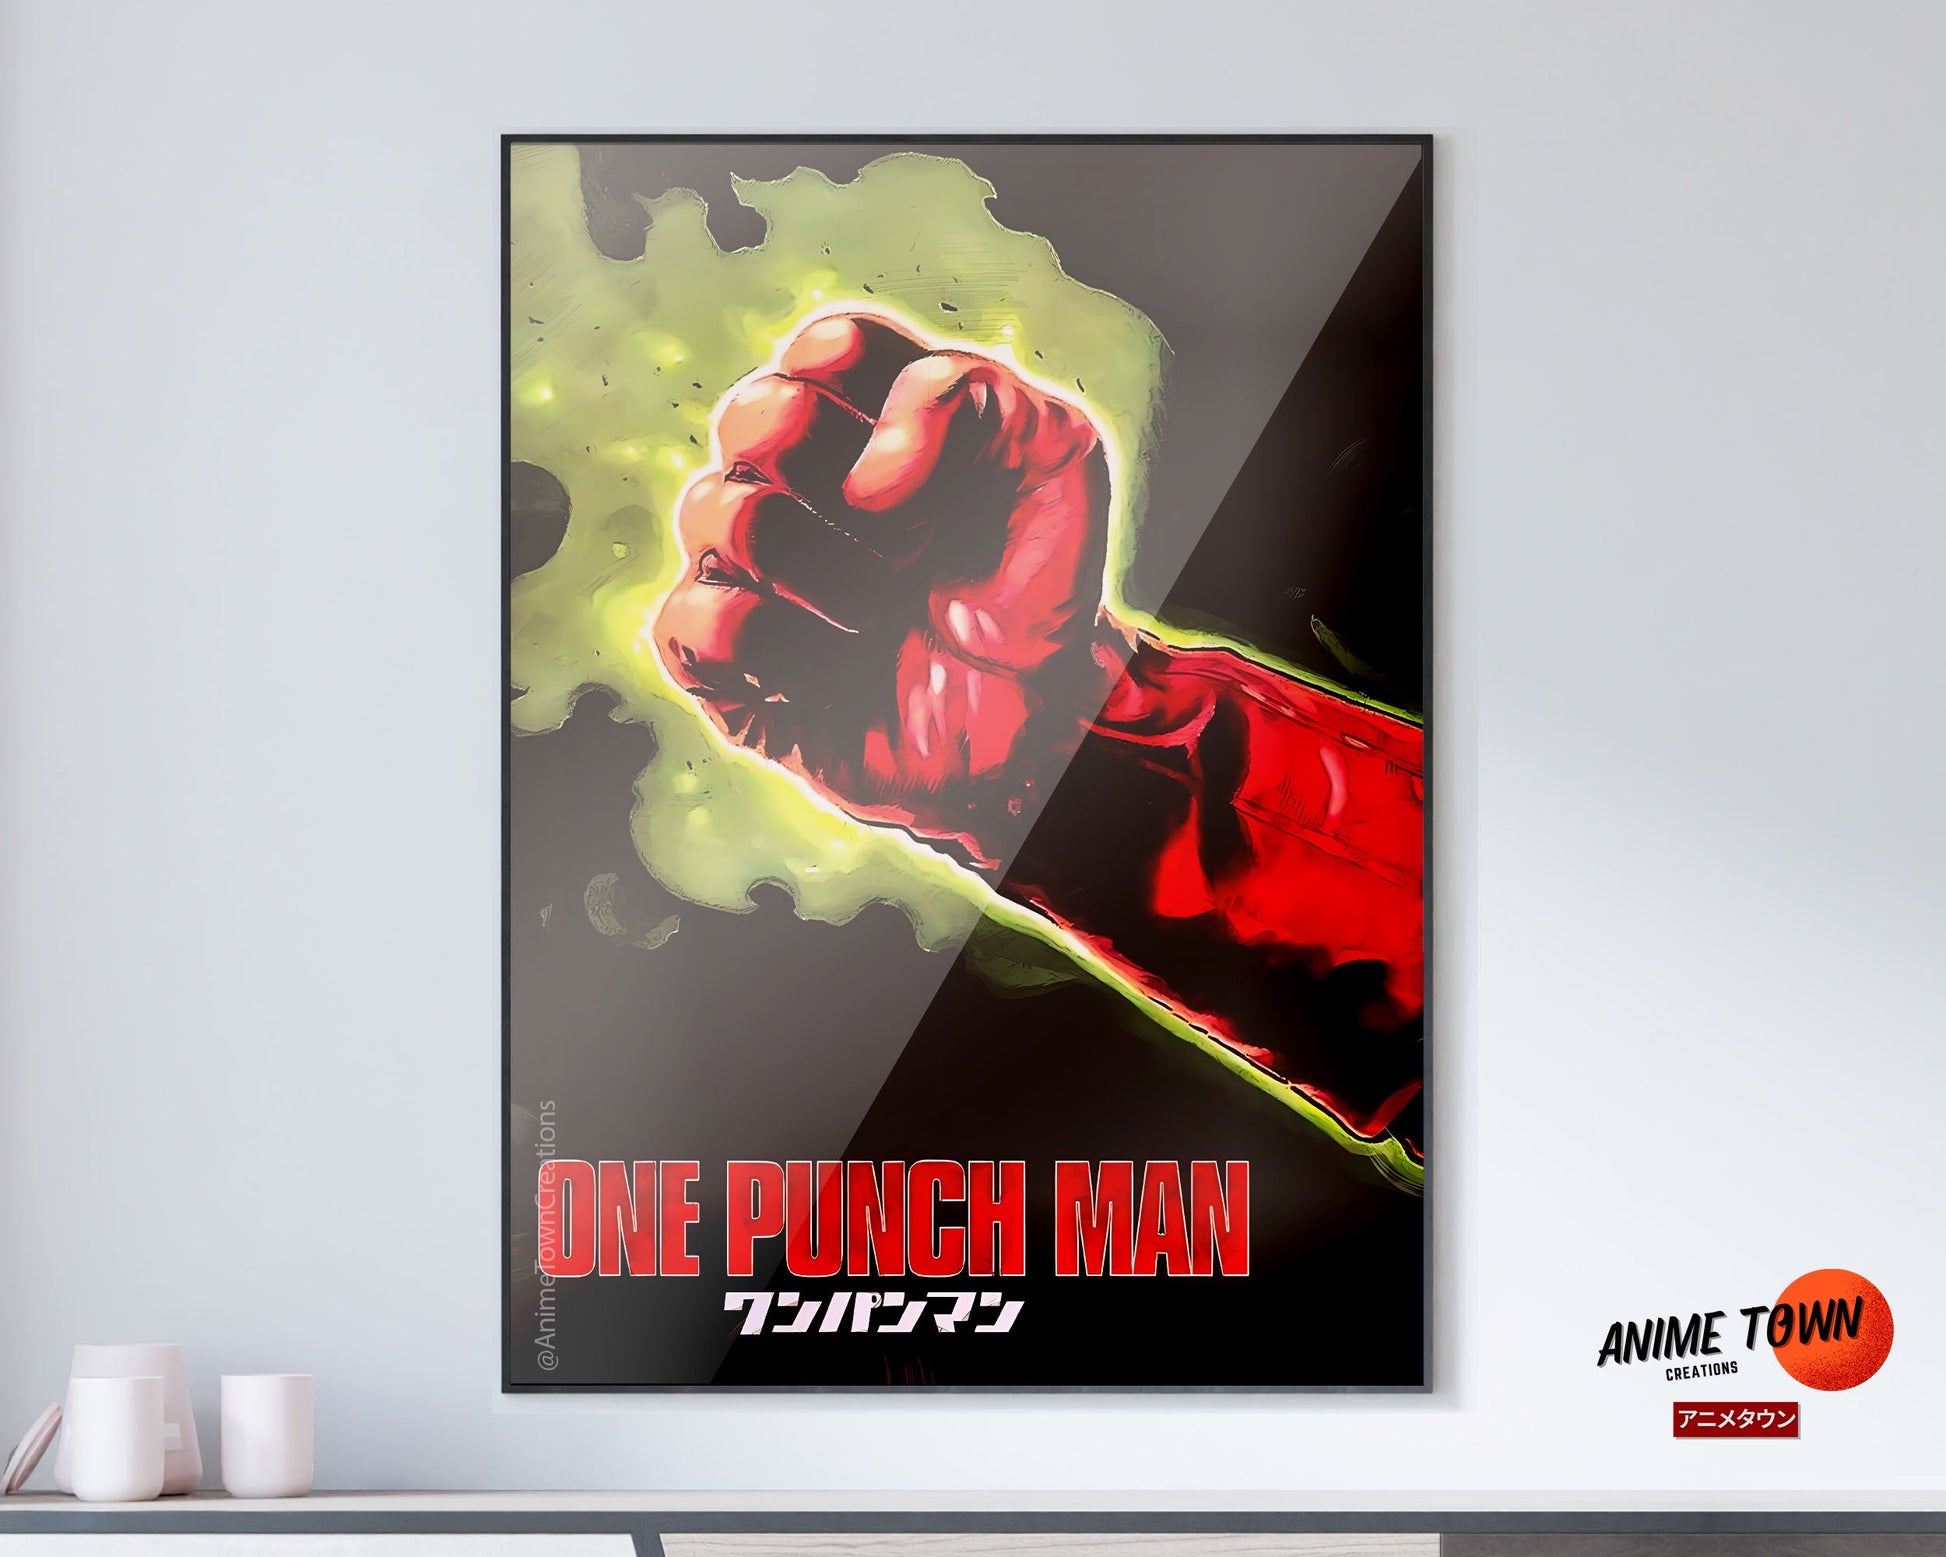 Anime Town Creations Poster One Punch Man Fist 5" x 7" Home Goods - Anime One Punch Man Poster